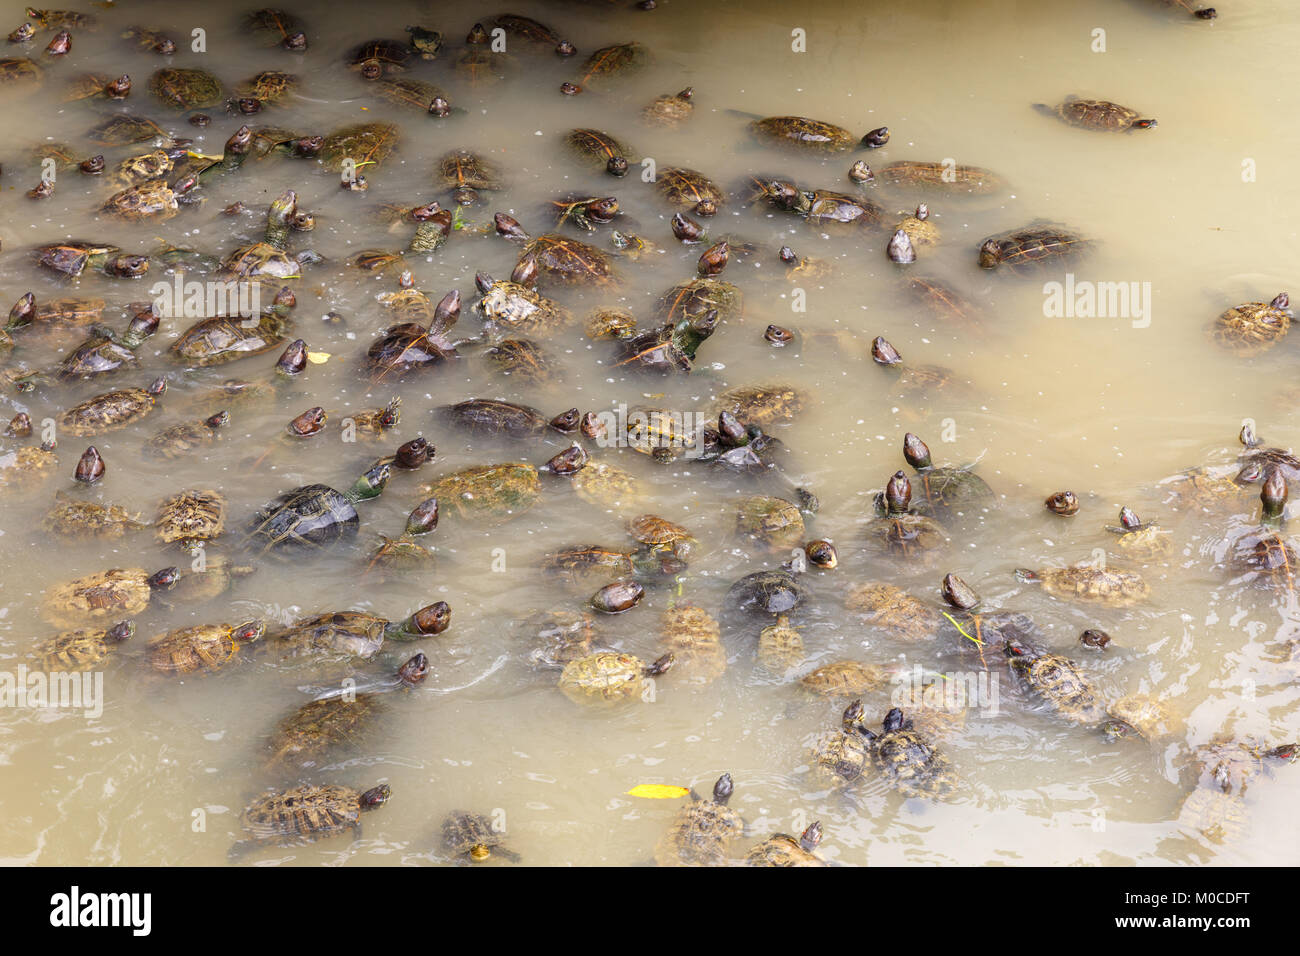 many turtles swim in a pond with dirty water Stock Photo